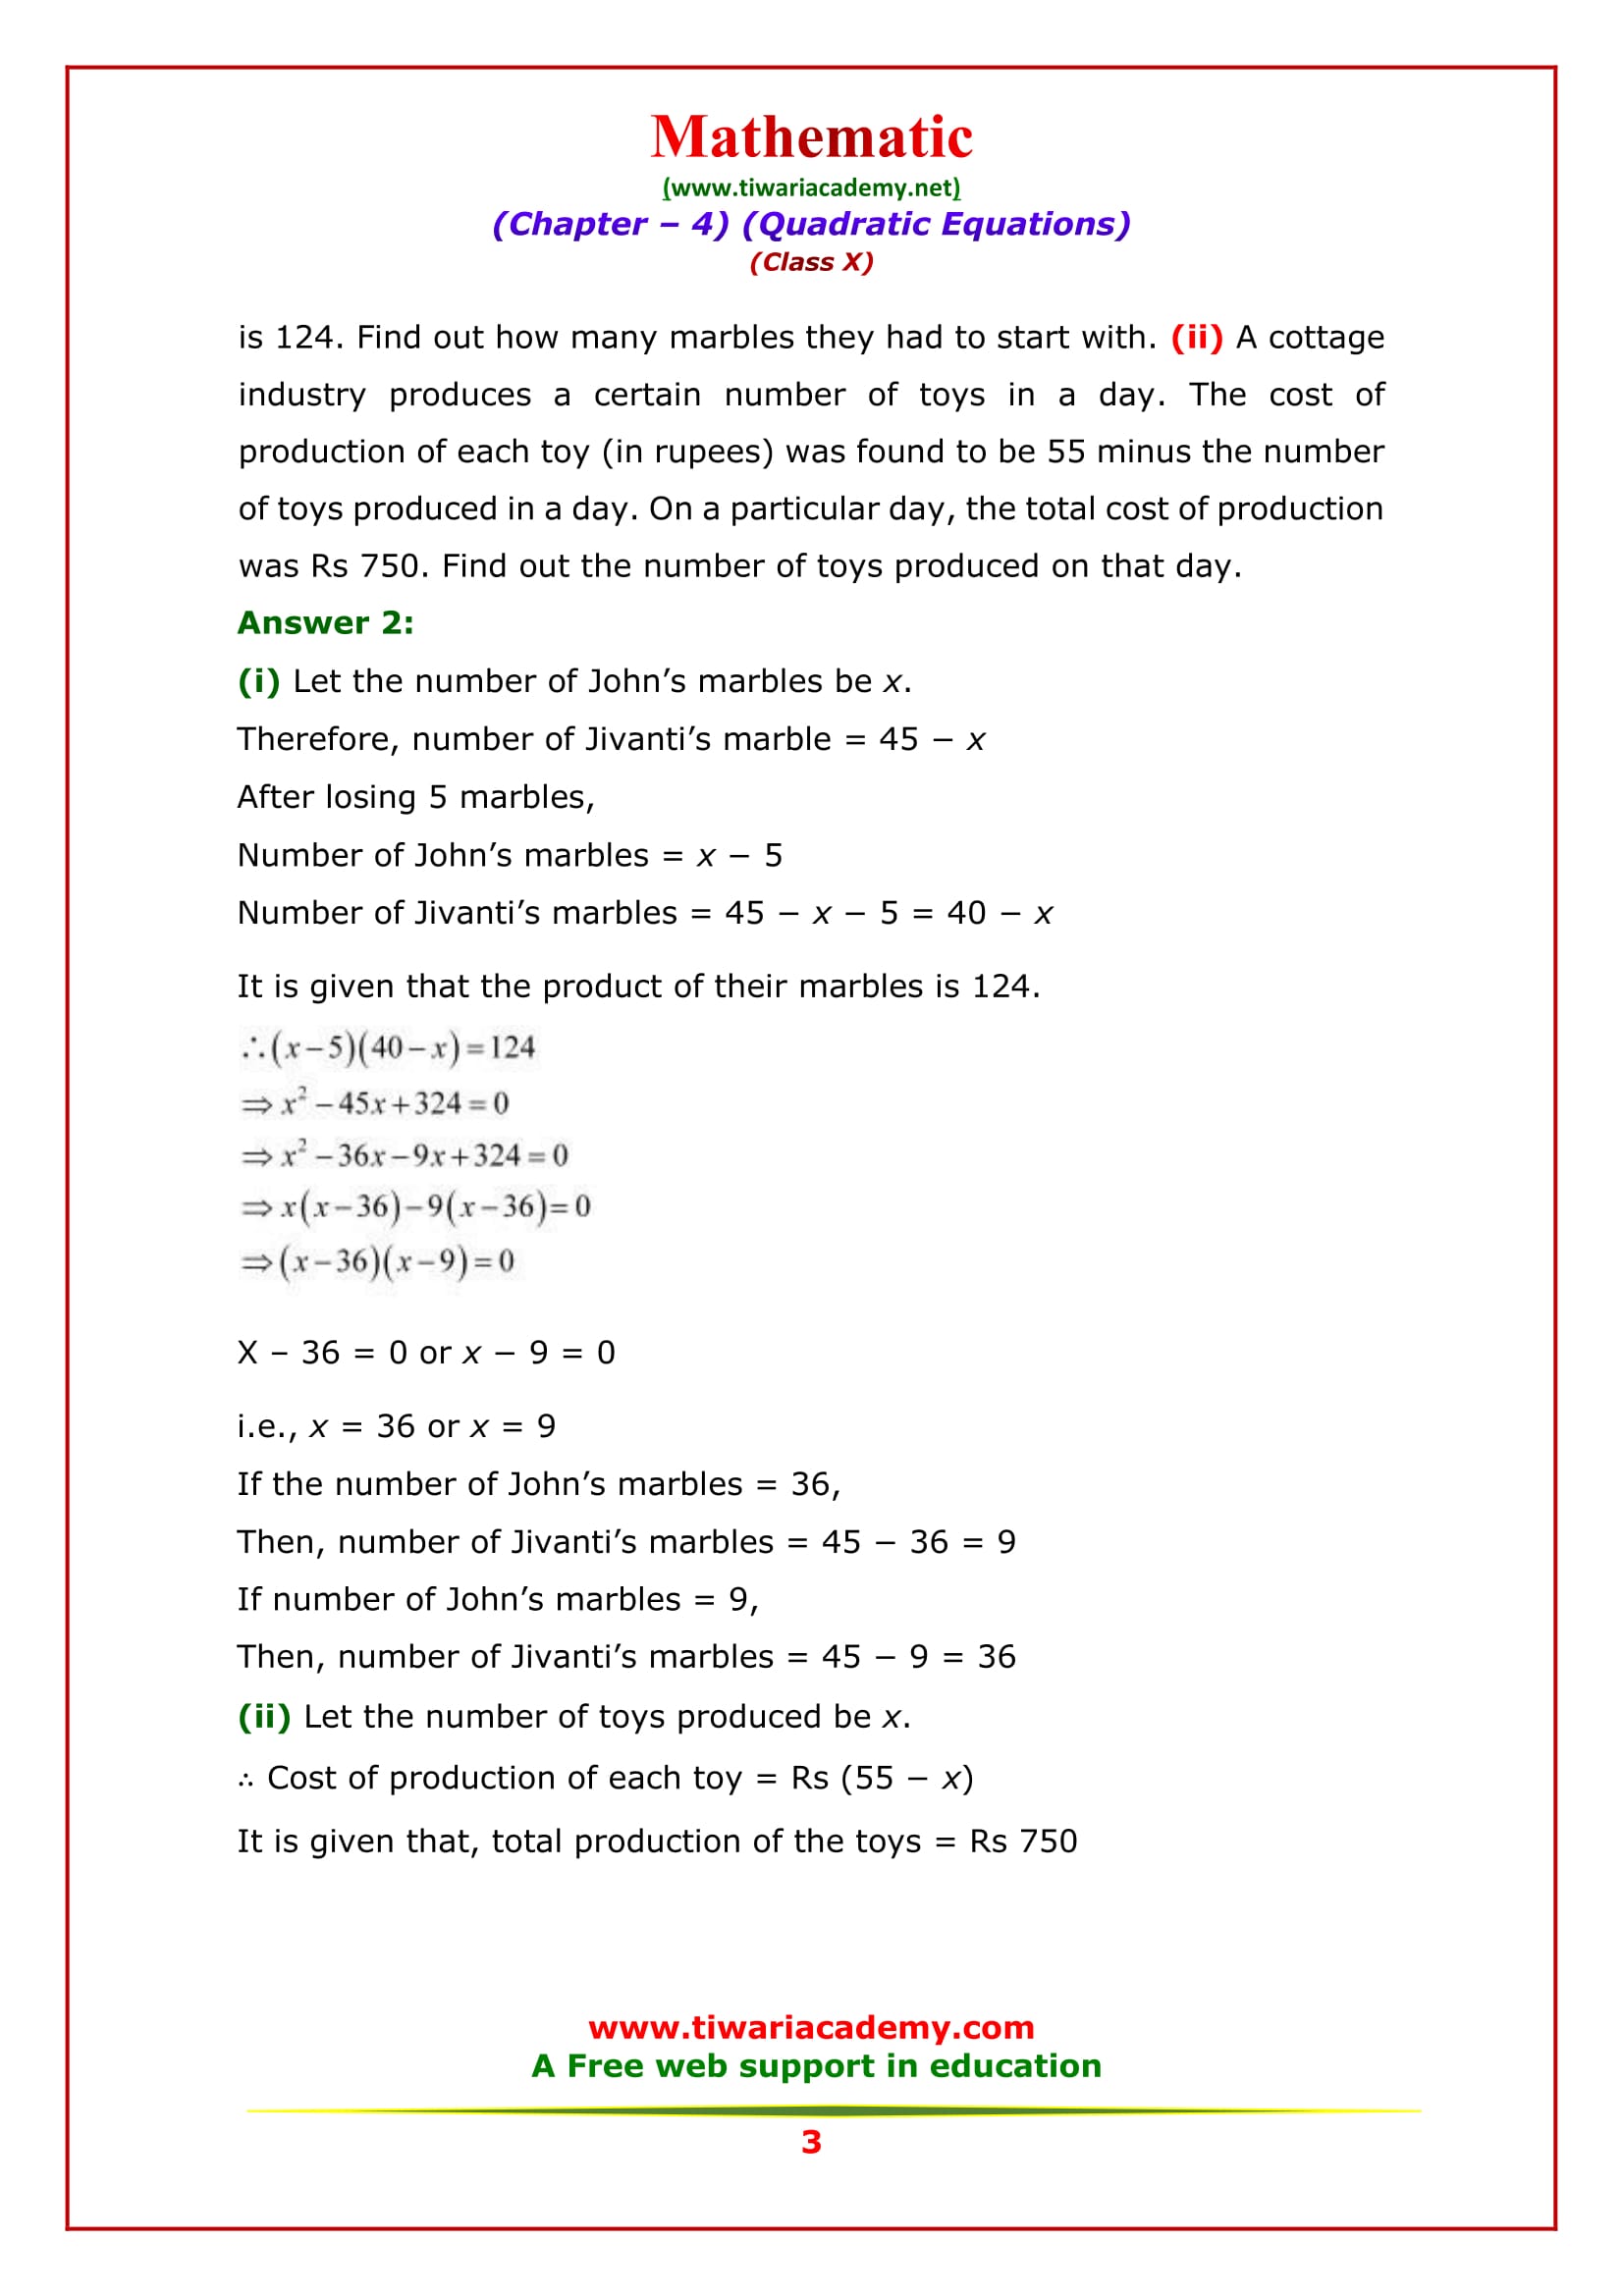 class 10 maths chapter 4 case study questions with solutions